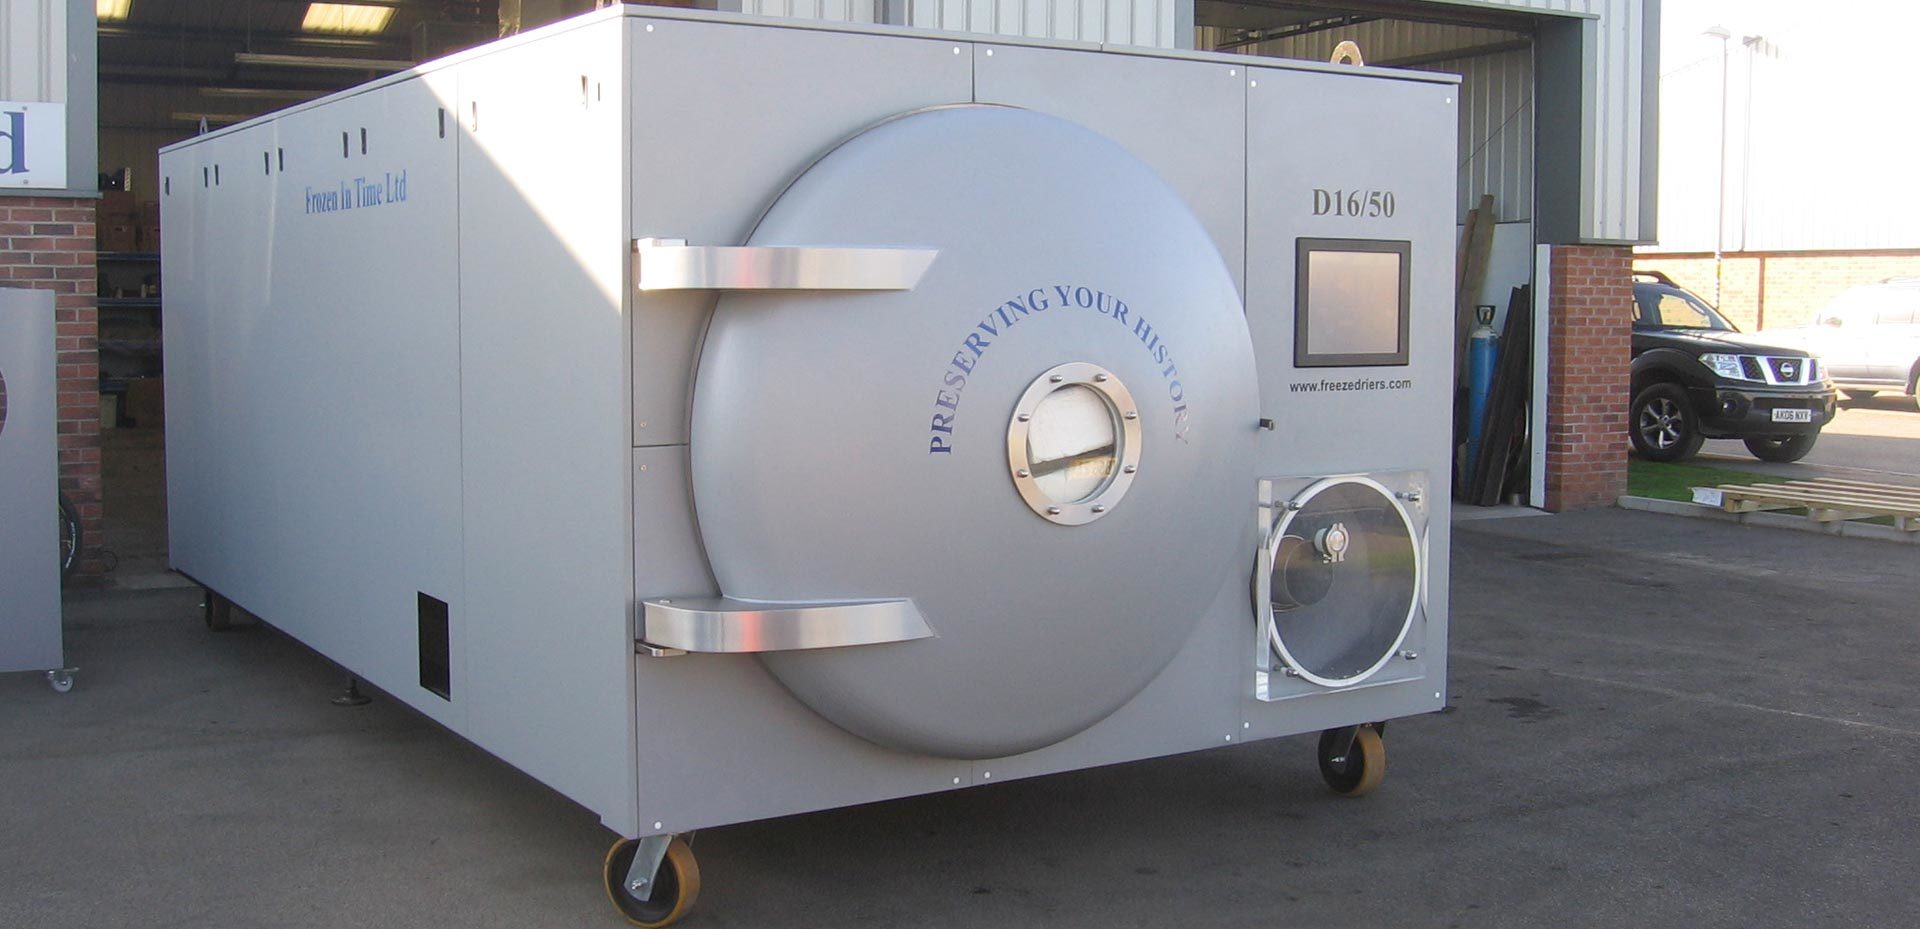 Typical freeze drying unit